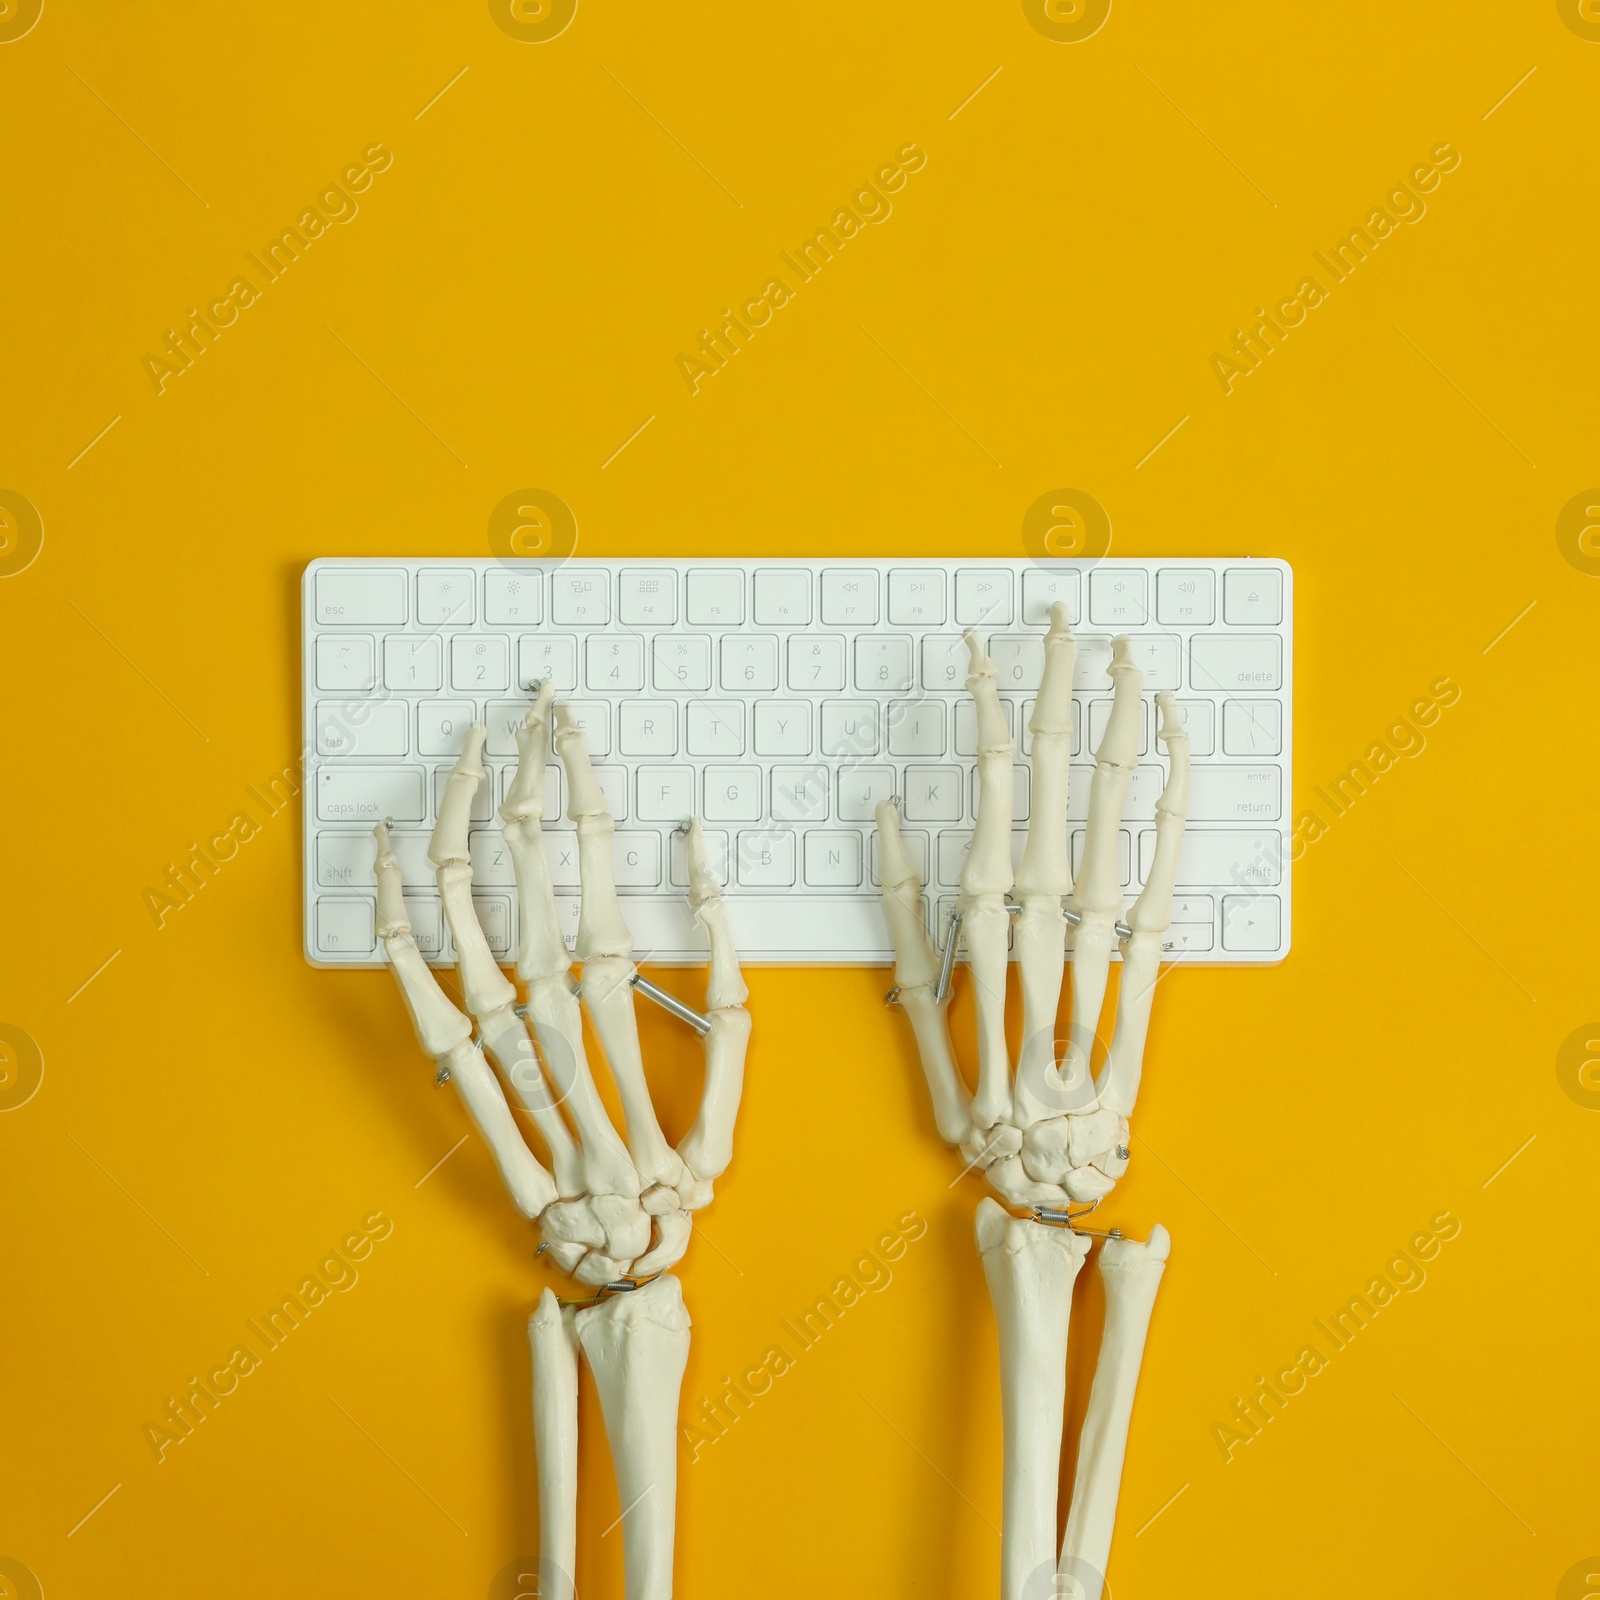 Photo of Human skeleton using computer keyboard on yellow background, top view